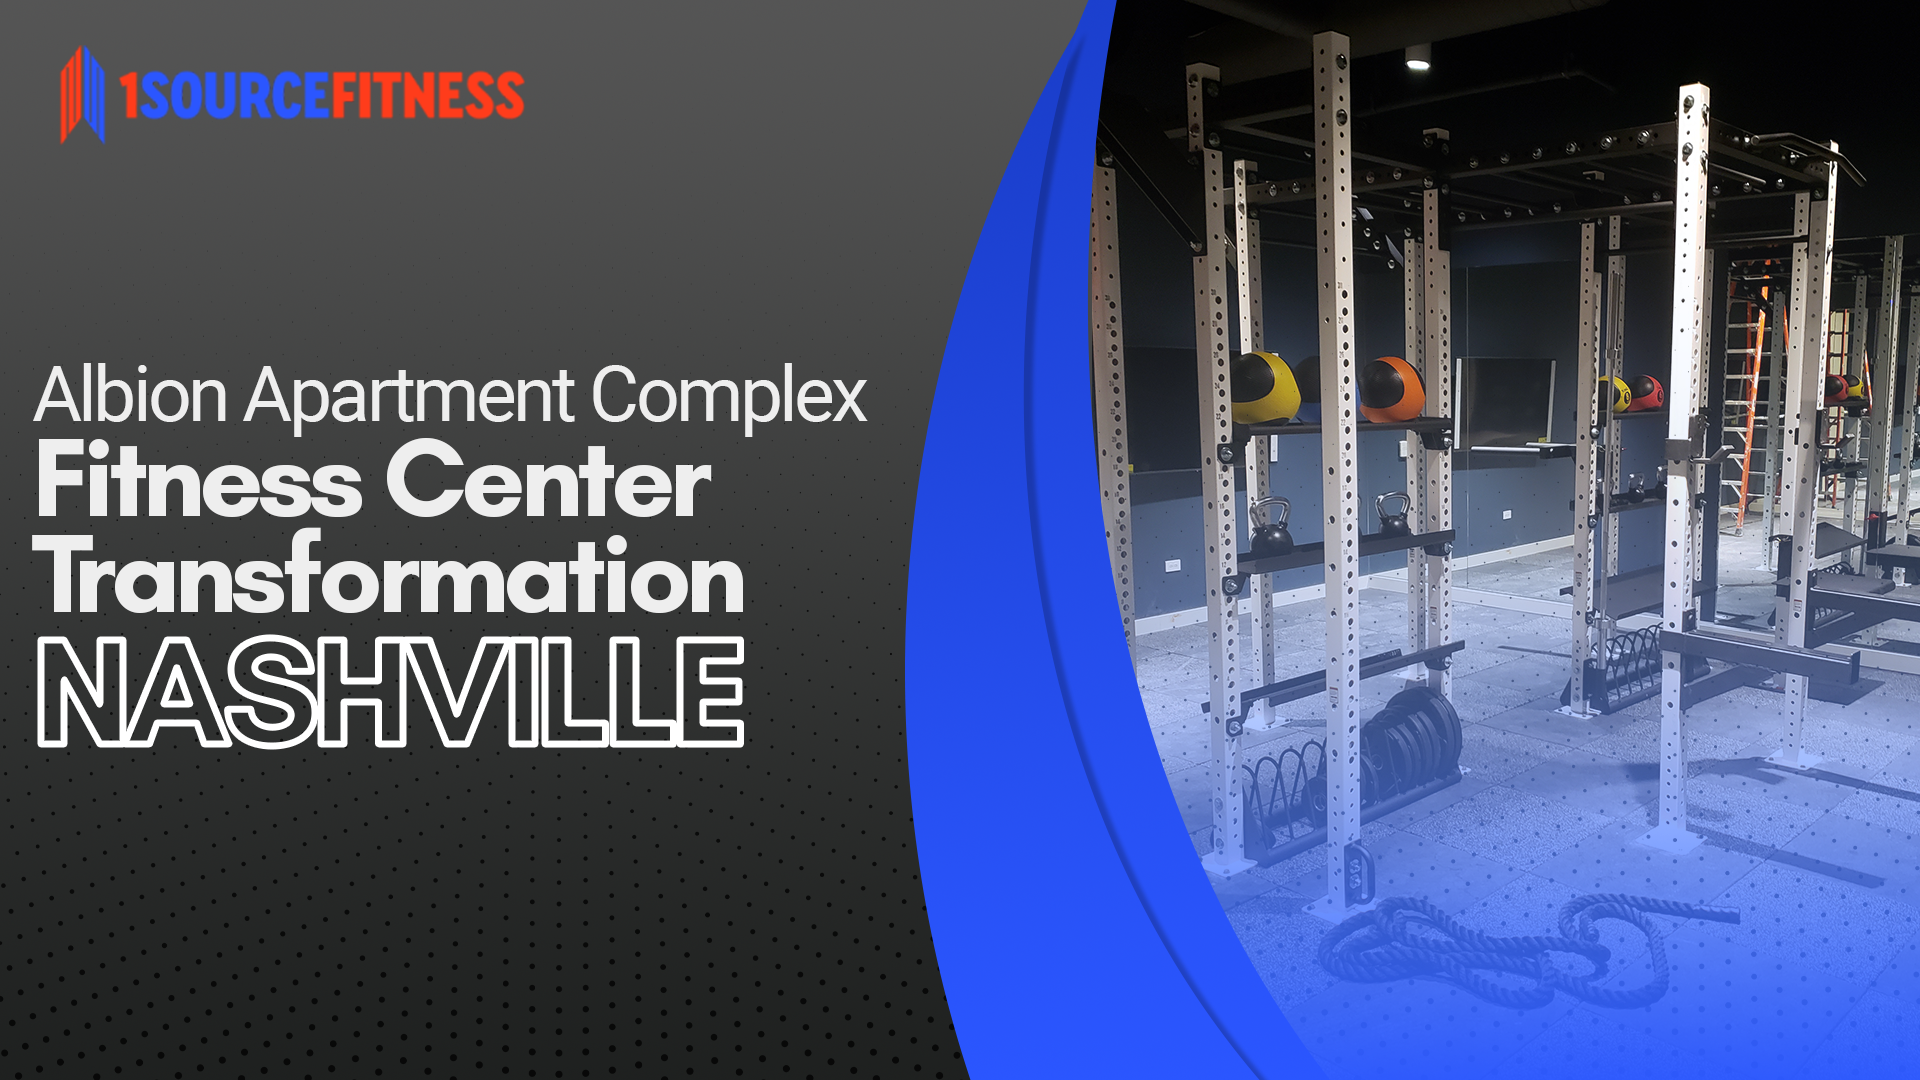 Gym equipment with the text "Albion Apartment Complex Fitness Center Transformation in Nashville" 